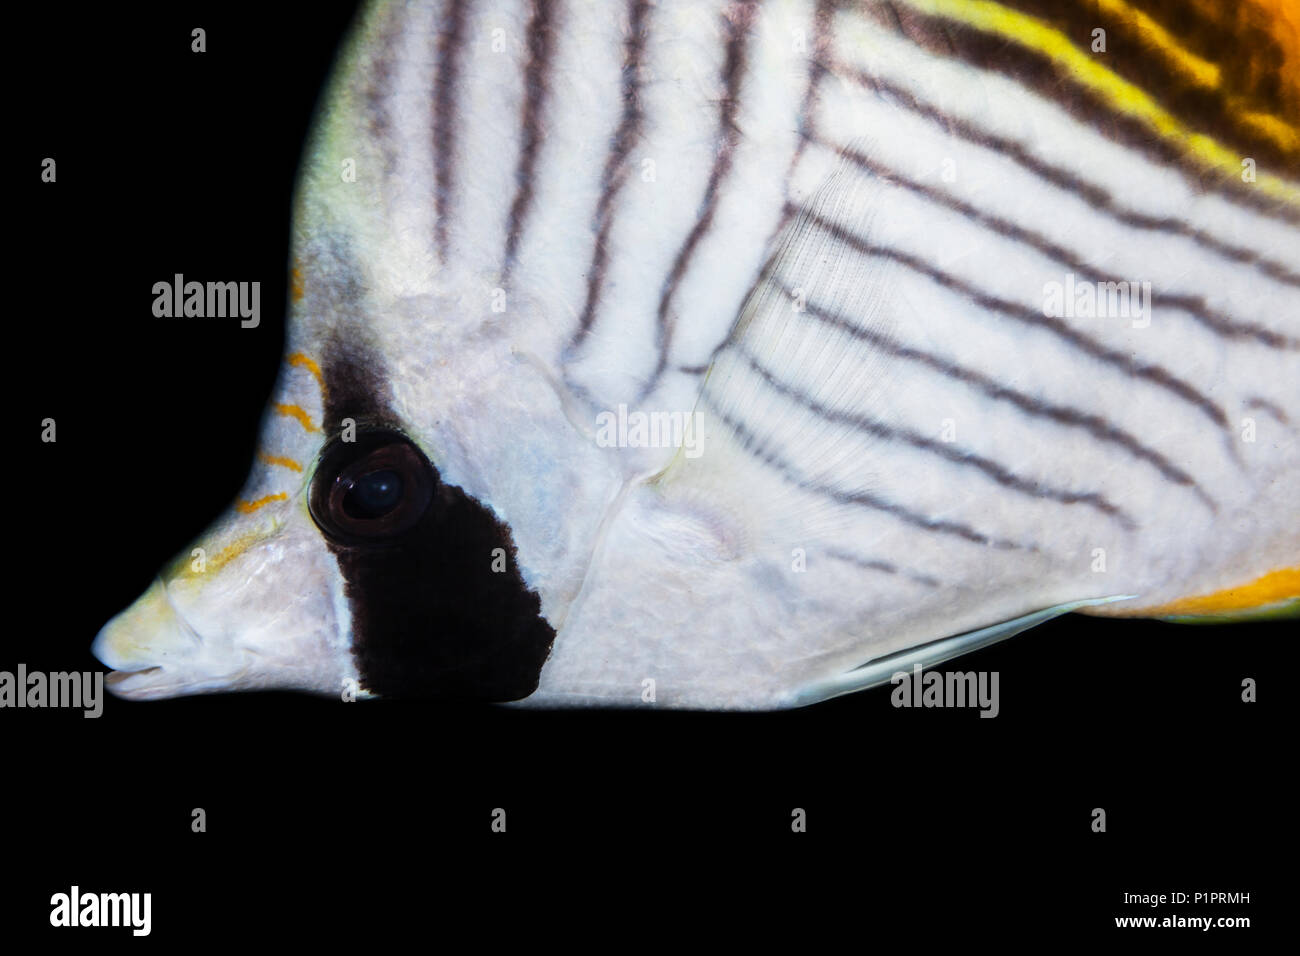 Close-up of a Threadfin Butterflyfish (Chaetodon auriga); Maui, Hawaii, United States of America Stock Photo